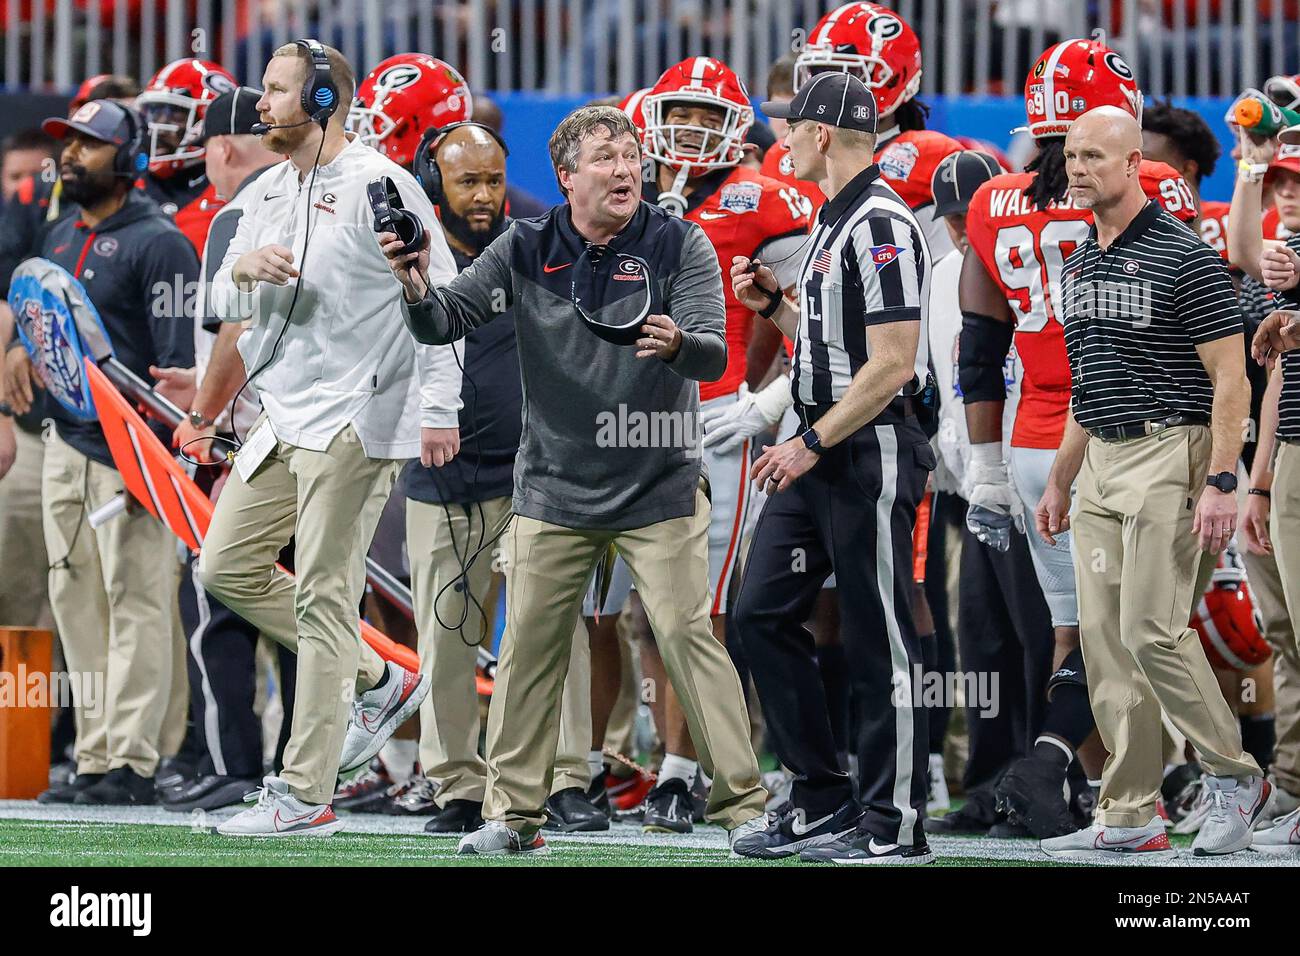 December 31, 2022: Georgia head coach, Kirby Smart, questions an official about a call during the Chick-fil-A Peach Bowl (a College Football Playoff Semifinal) featuring the #4 Ohio State Buckeyes and the #1 Georgia Bulldogs, played at Mercedes-Benz Stadium in Atlanta, Georgia. The Georgia Bulldogs come from behind to defeat Ohio State, 42-41. Cecil Copeland/MarinMedia.org/CSM Stock Photo